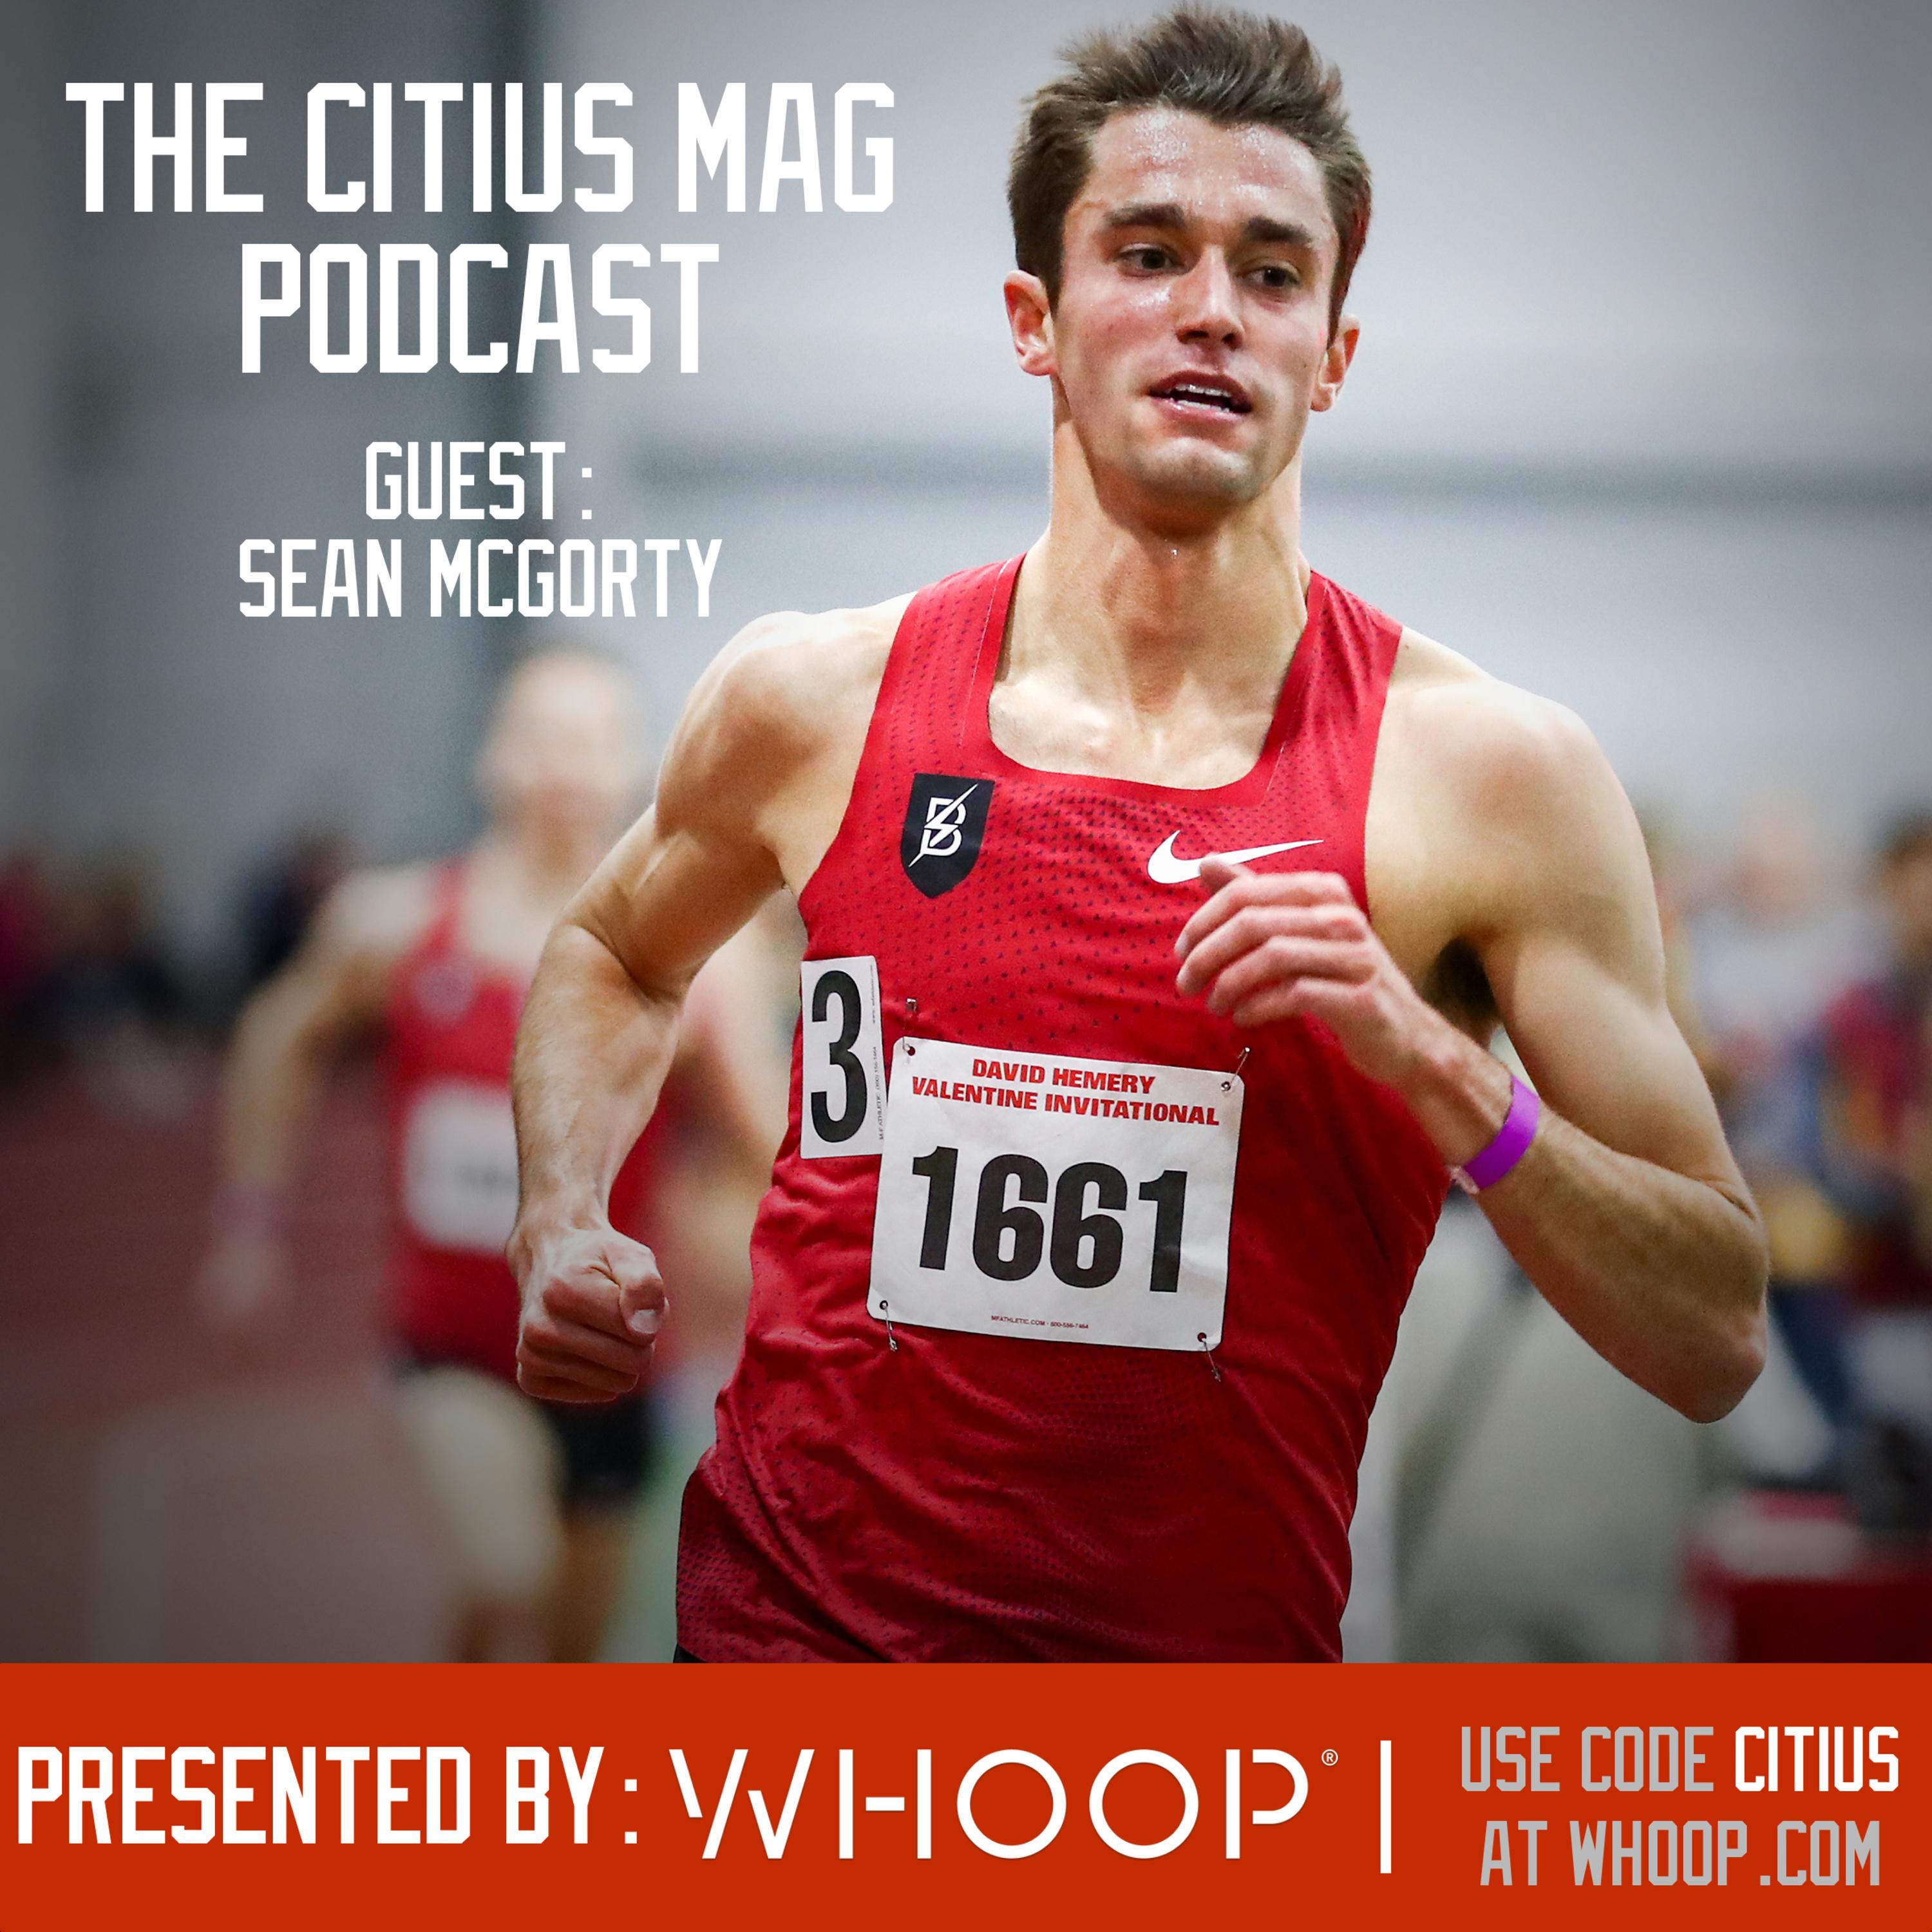 Sean McGorty's Olympic Trials Outlook After The Fastest Steeplechase Debut In American History